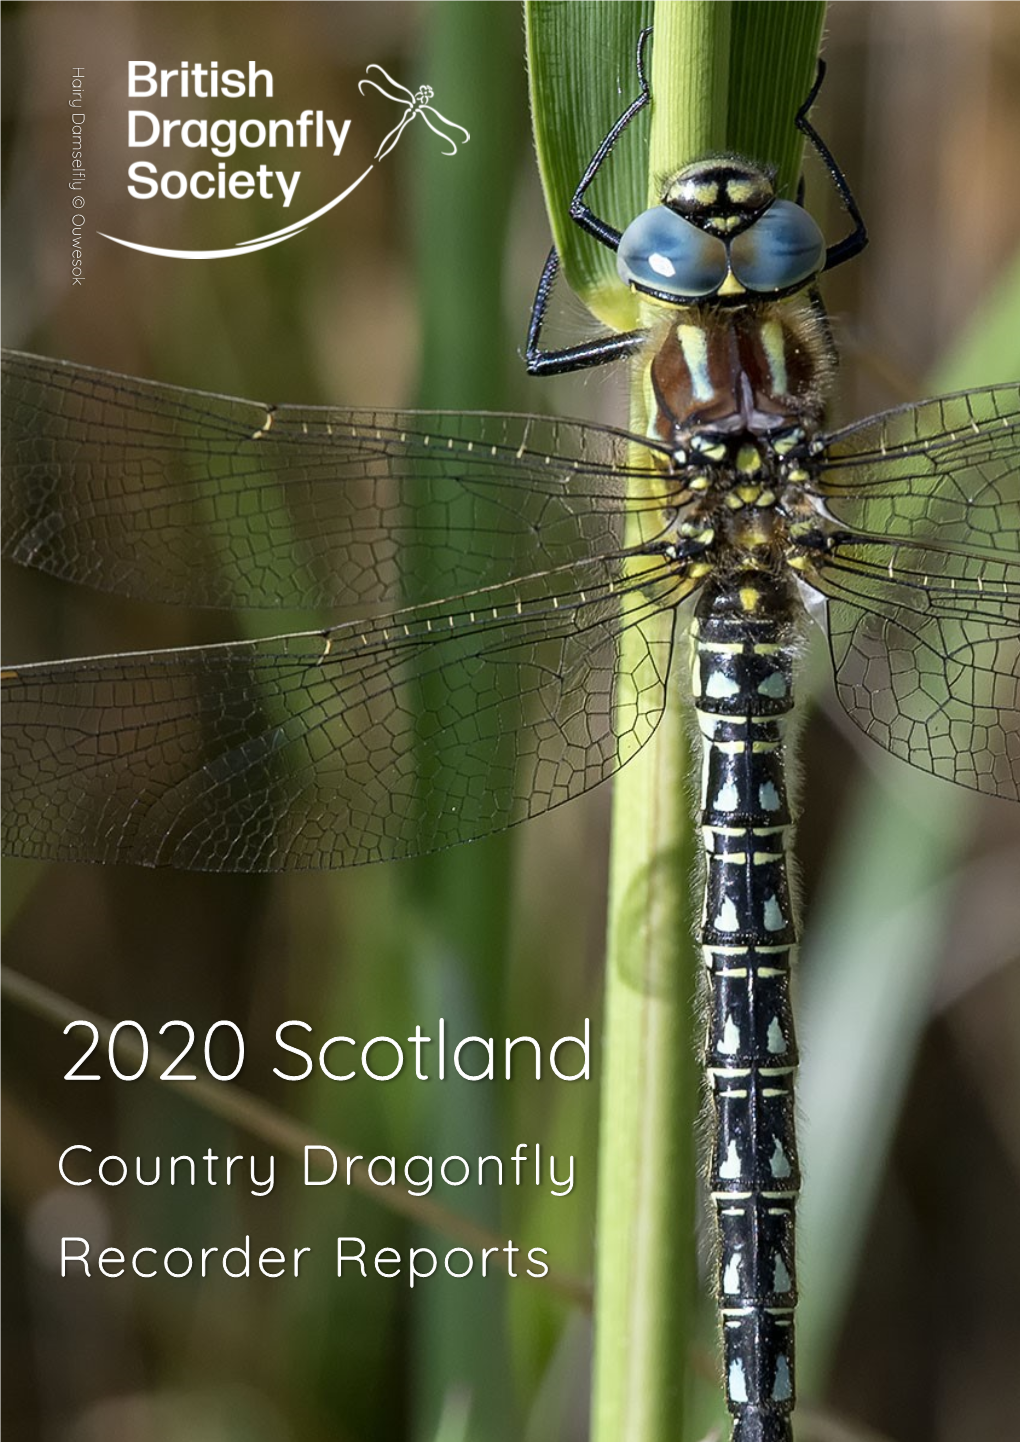 County Dragonfly Recorder Reports 2020 Scotland